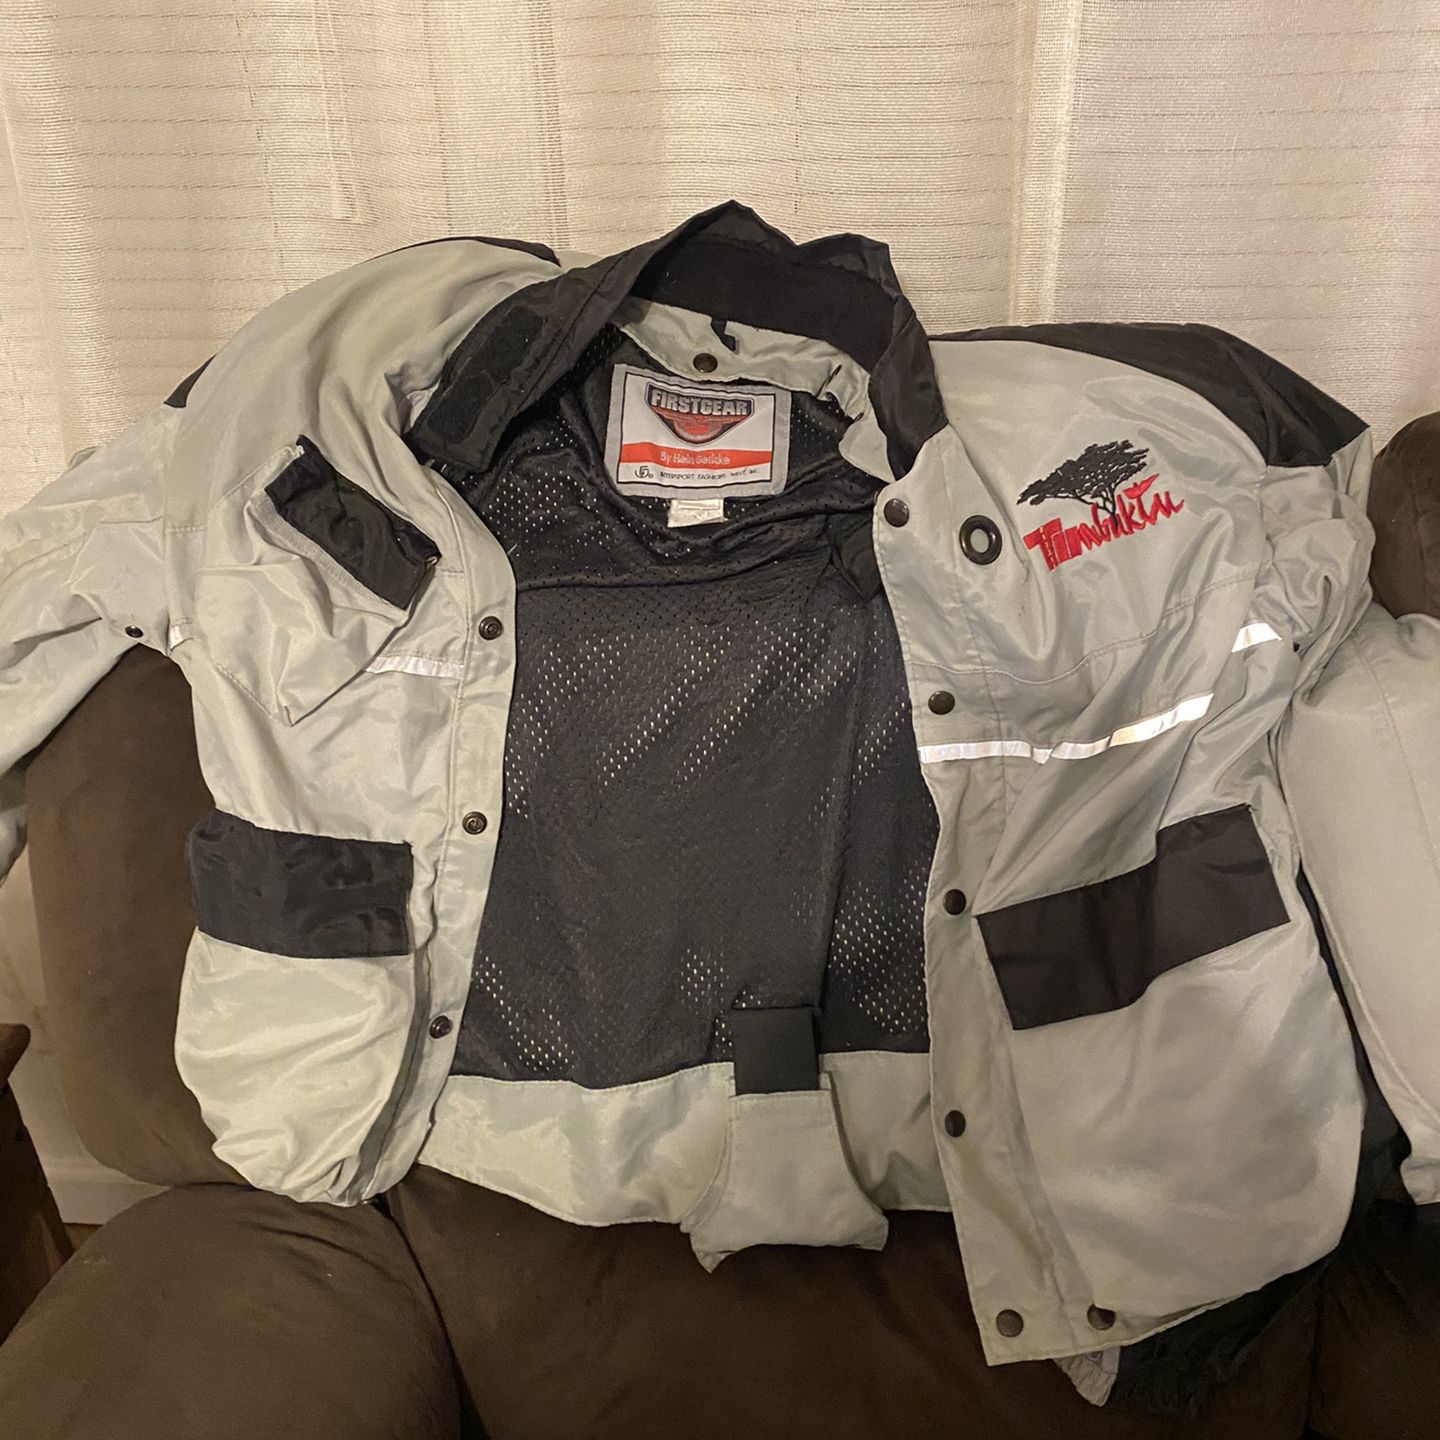 First Gear Motorcycle Jacket And Rain Suit